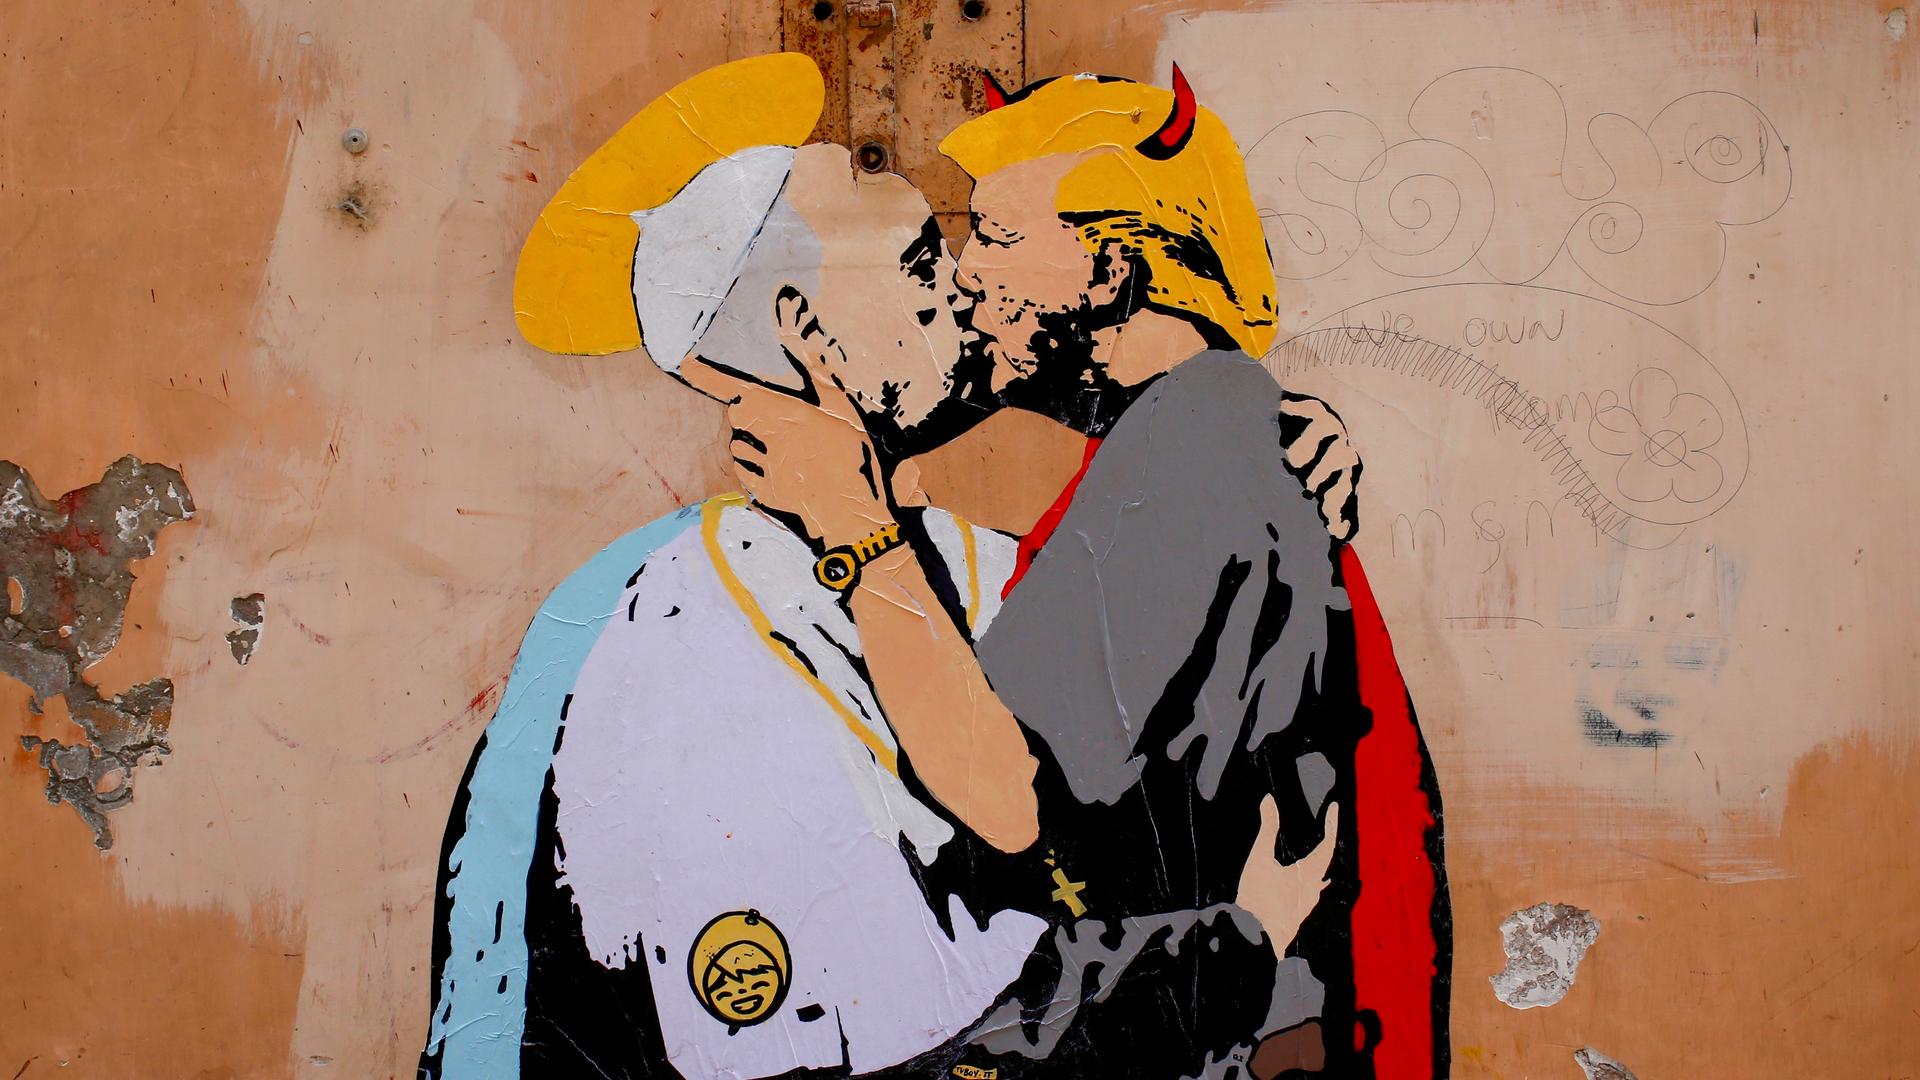 A mural signed by "TV Boy" and depicting Pope Francis and U.S. President Donald Trump kissing, is seen on a wall in downtown Rome, Italy May 11, 2017.